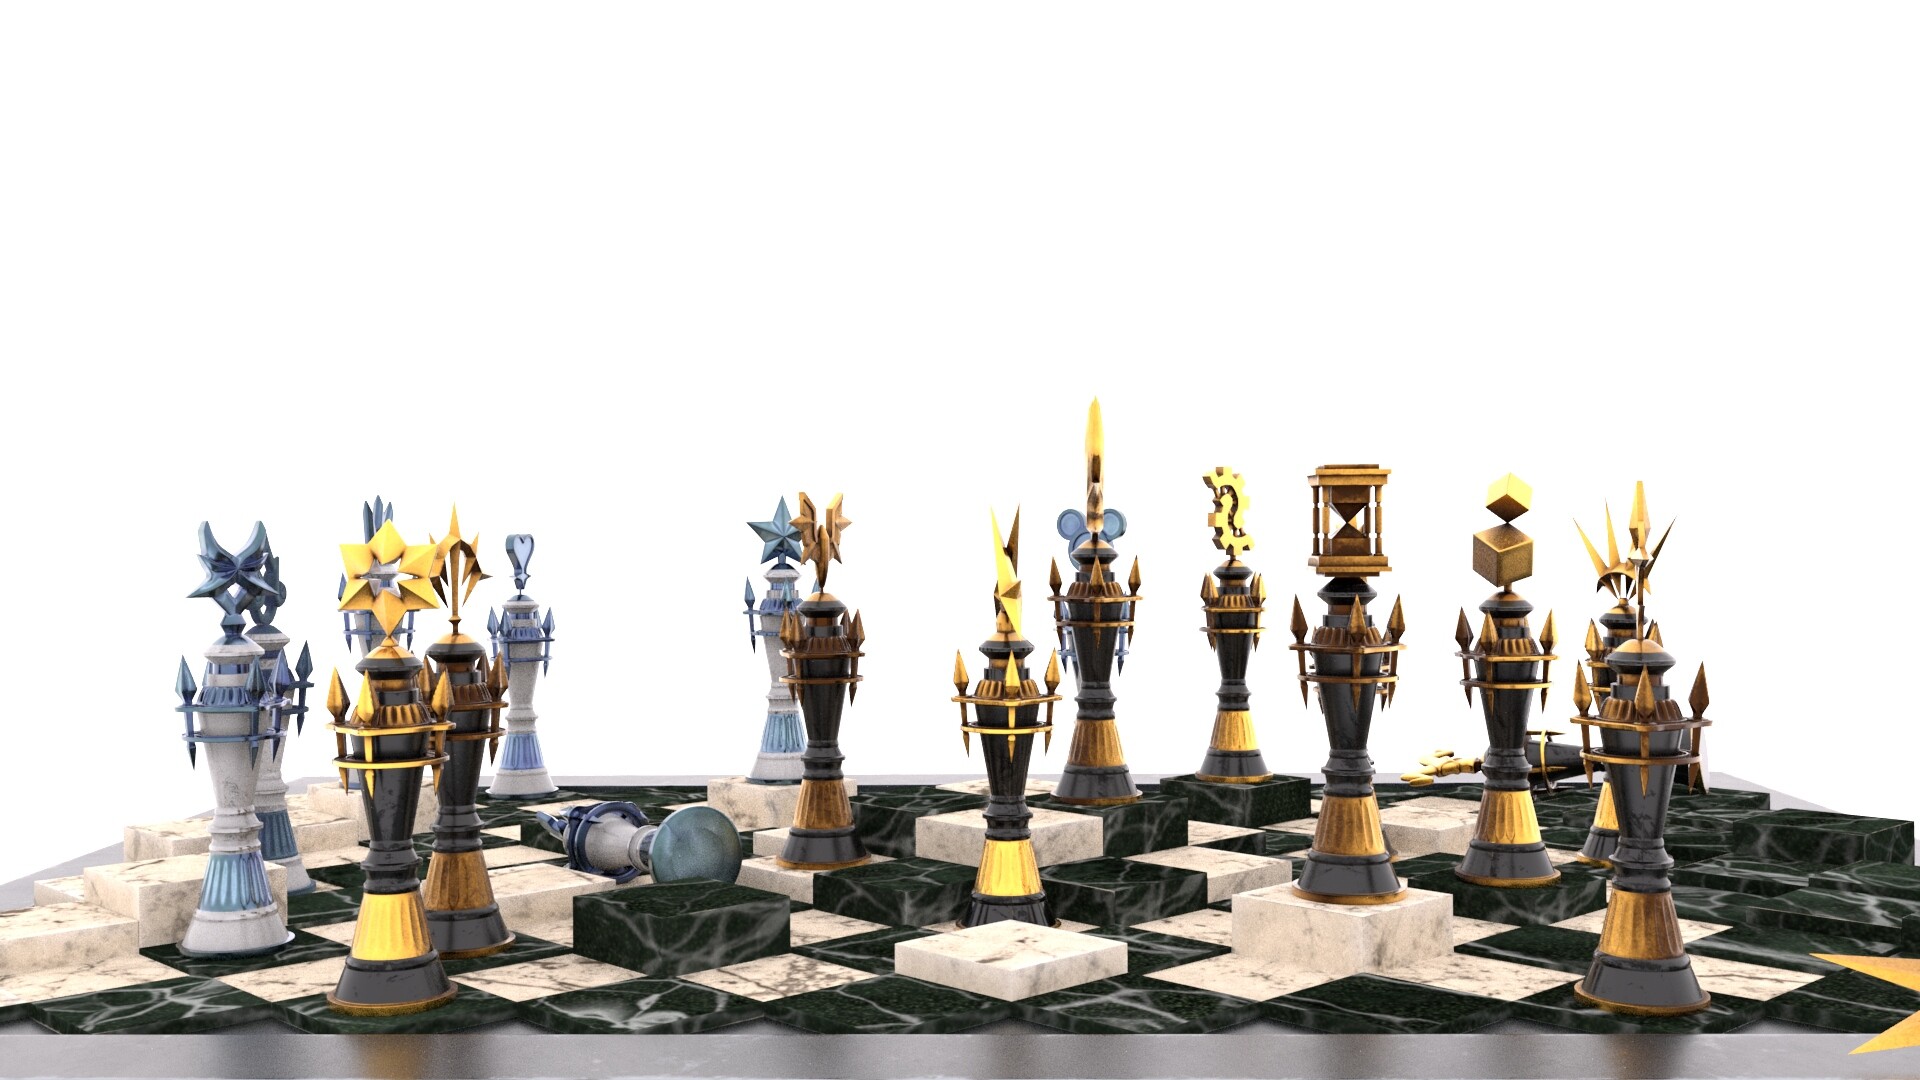 This Kingdom Hearts 3 chess set costs $700 and doesn't actually play chess